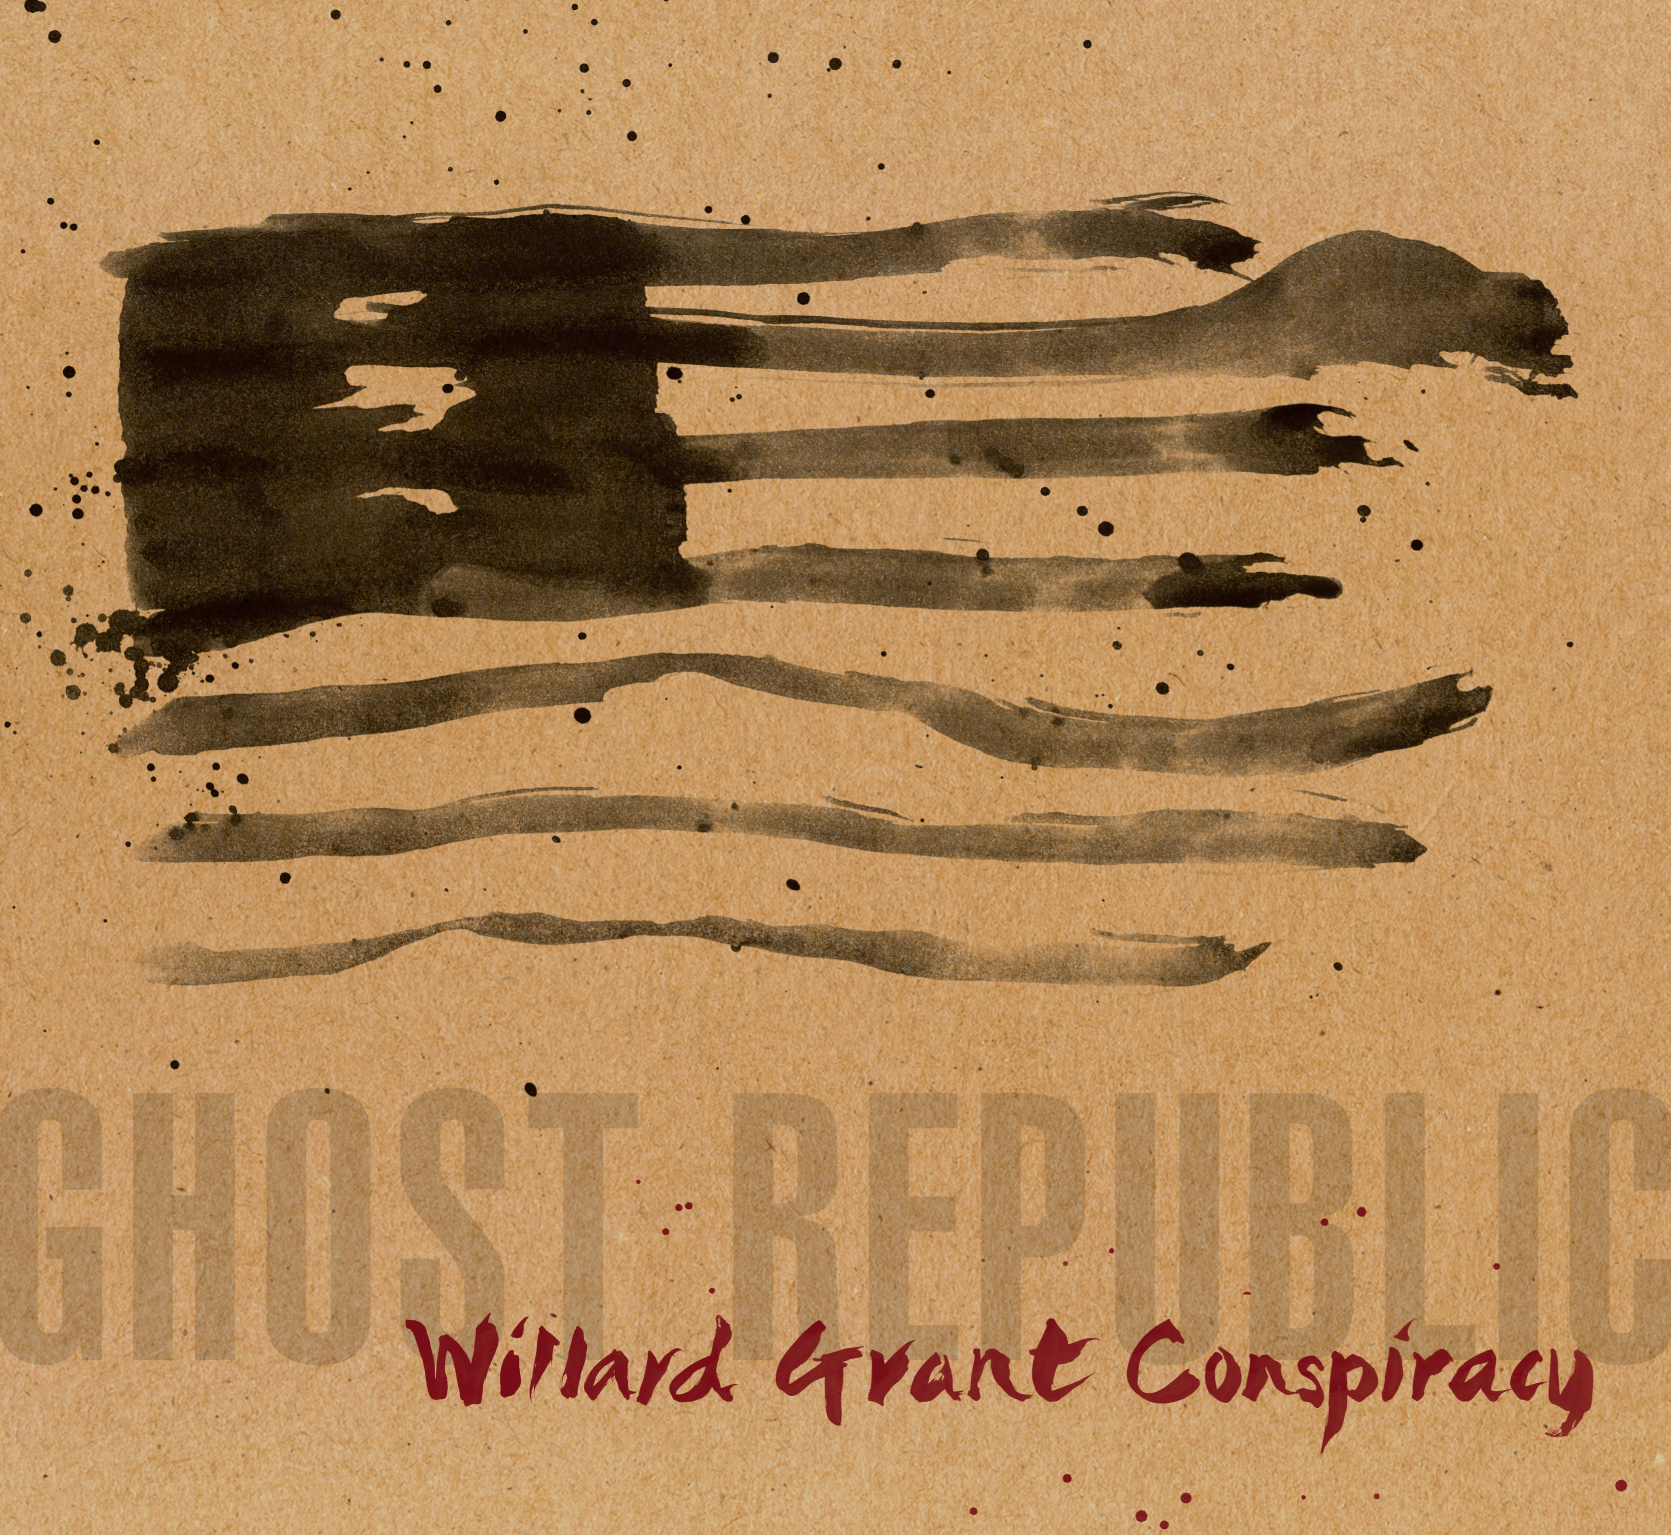 News Added Sep 05, 2013 “Ghost Republic” is the first album from Willard Grant Conspiracy since “Paper Covers Stone” (2009) and the first album of entirely new music since “Pilgrim Road” (2008). The album was written and recorded in Massachusetts by David Michael Curry and Robert Fisher of Willard Grant Conspiracy. Although the band was […]